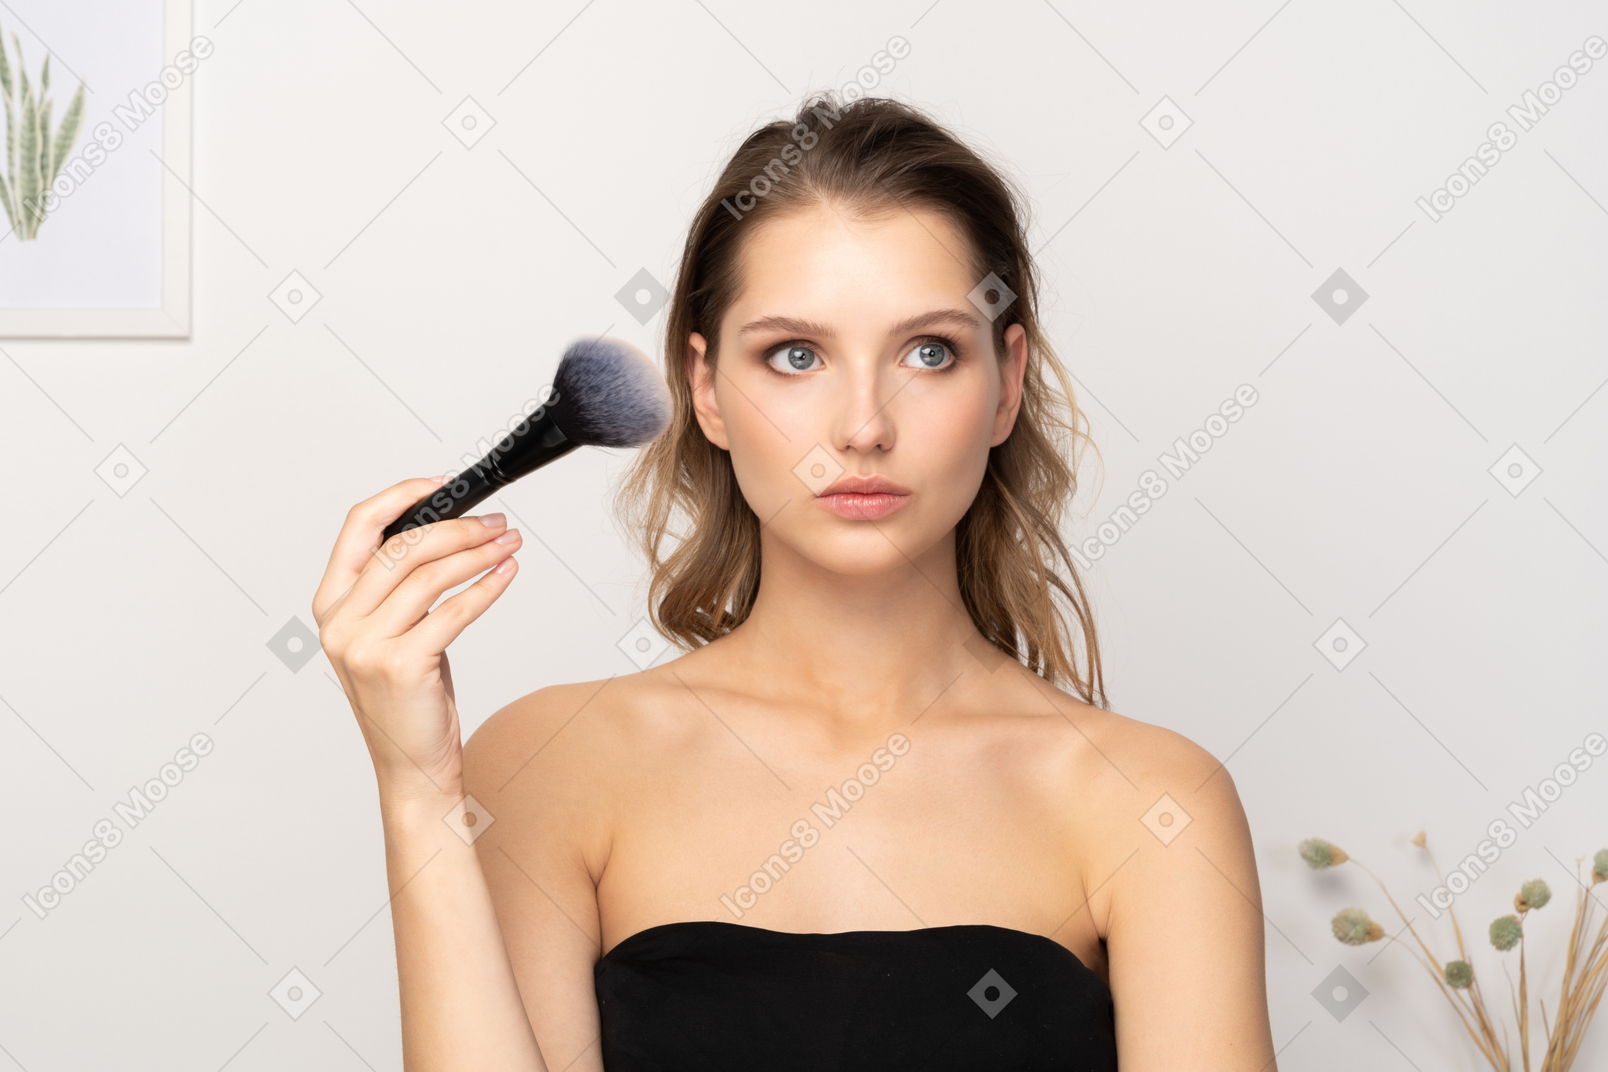 Front view of a thoughtful sensual young woman holding a make-up brush